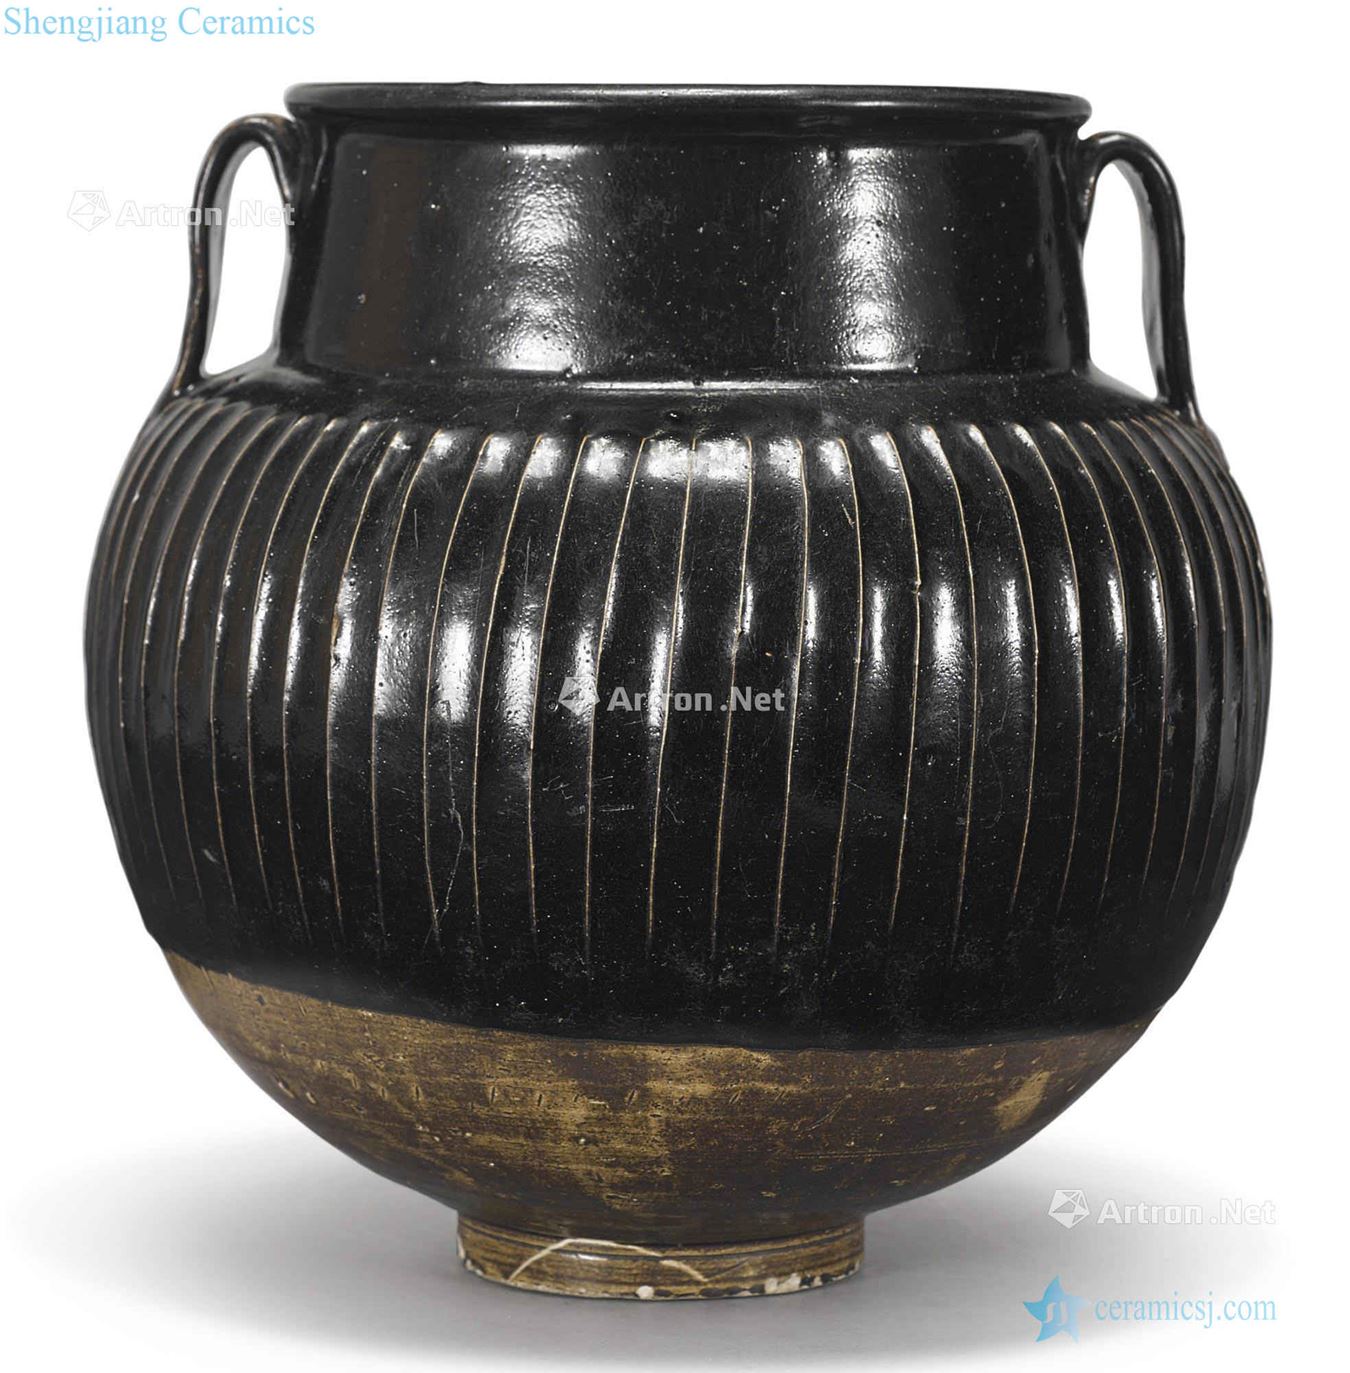 Northern song dynasty/gold The black glaze ridge lines double tank